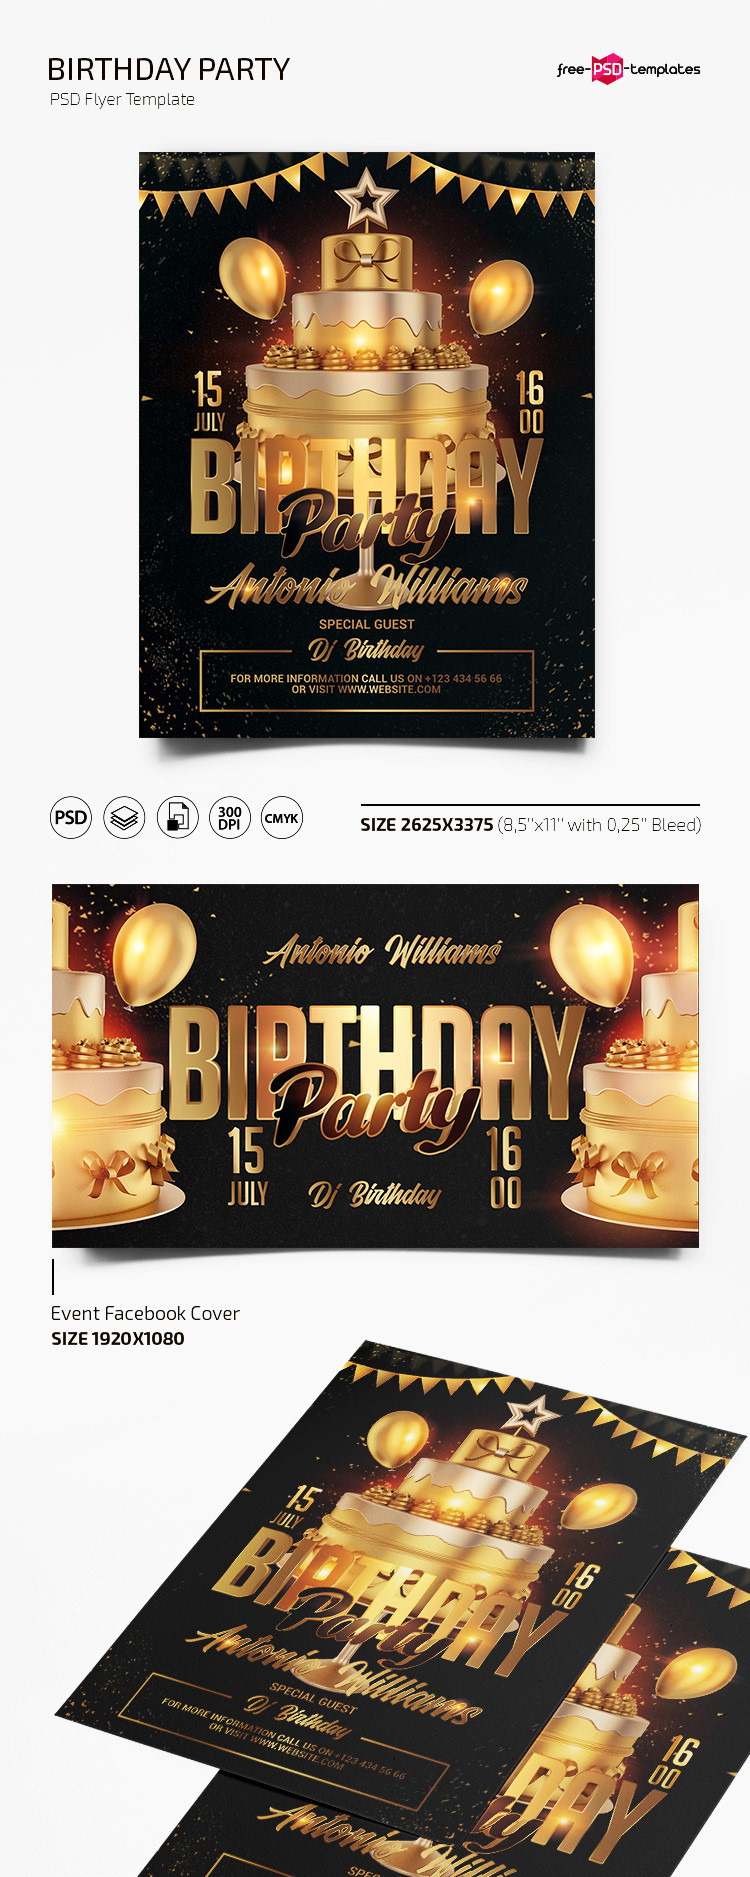 FREE BIRTHDAY PARTY FLYER TEMPLATE IN PSD on Behance Pertaining To Birthday Party Flyer Templates Free